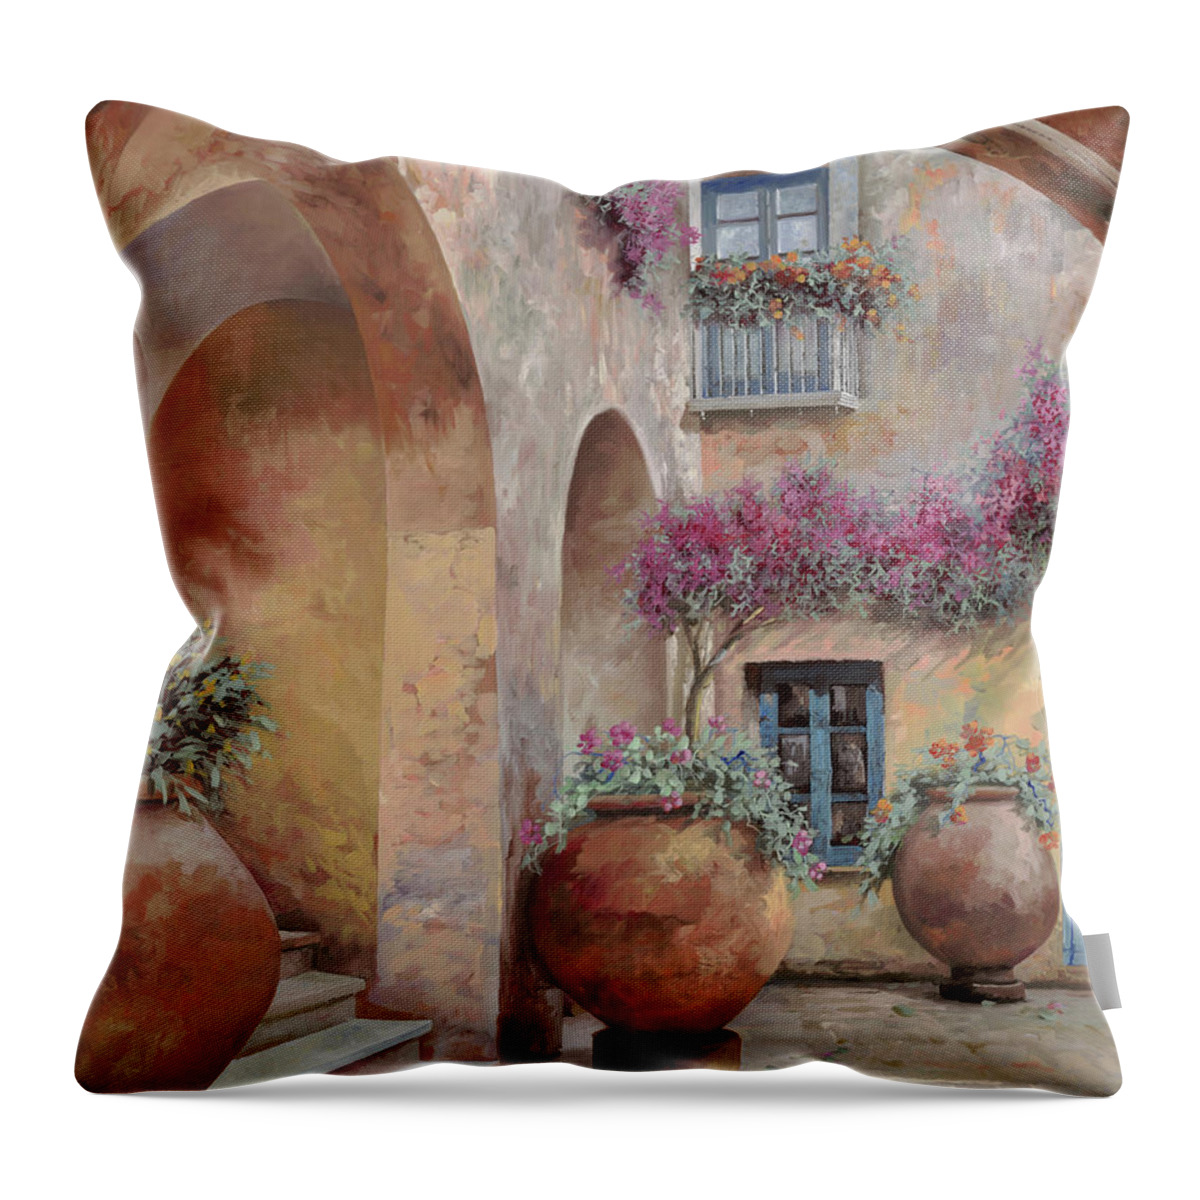 Arcade Throw Pillow featuring the painting Le Arcate In Cortile by Guido Borelli